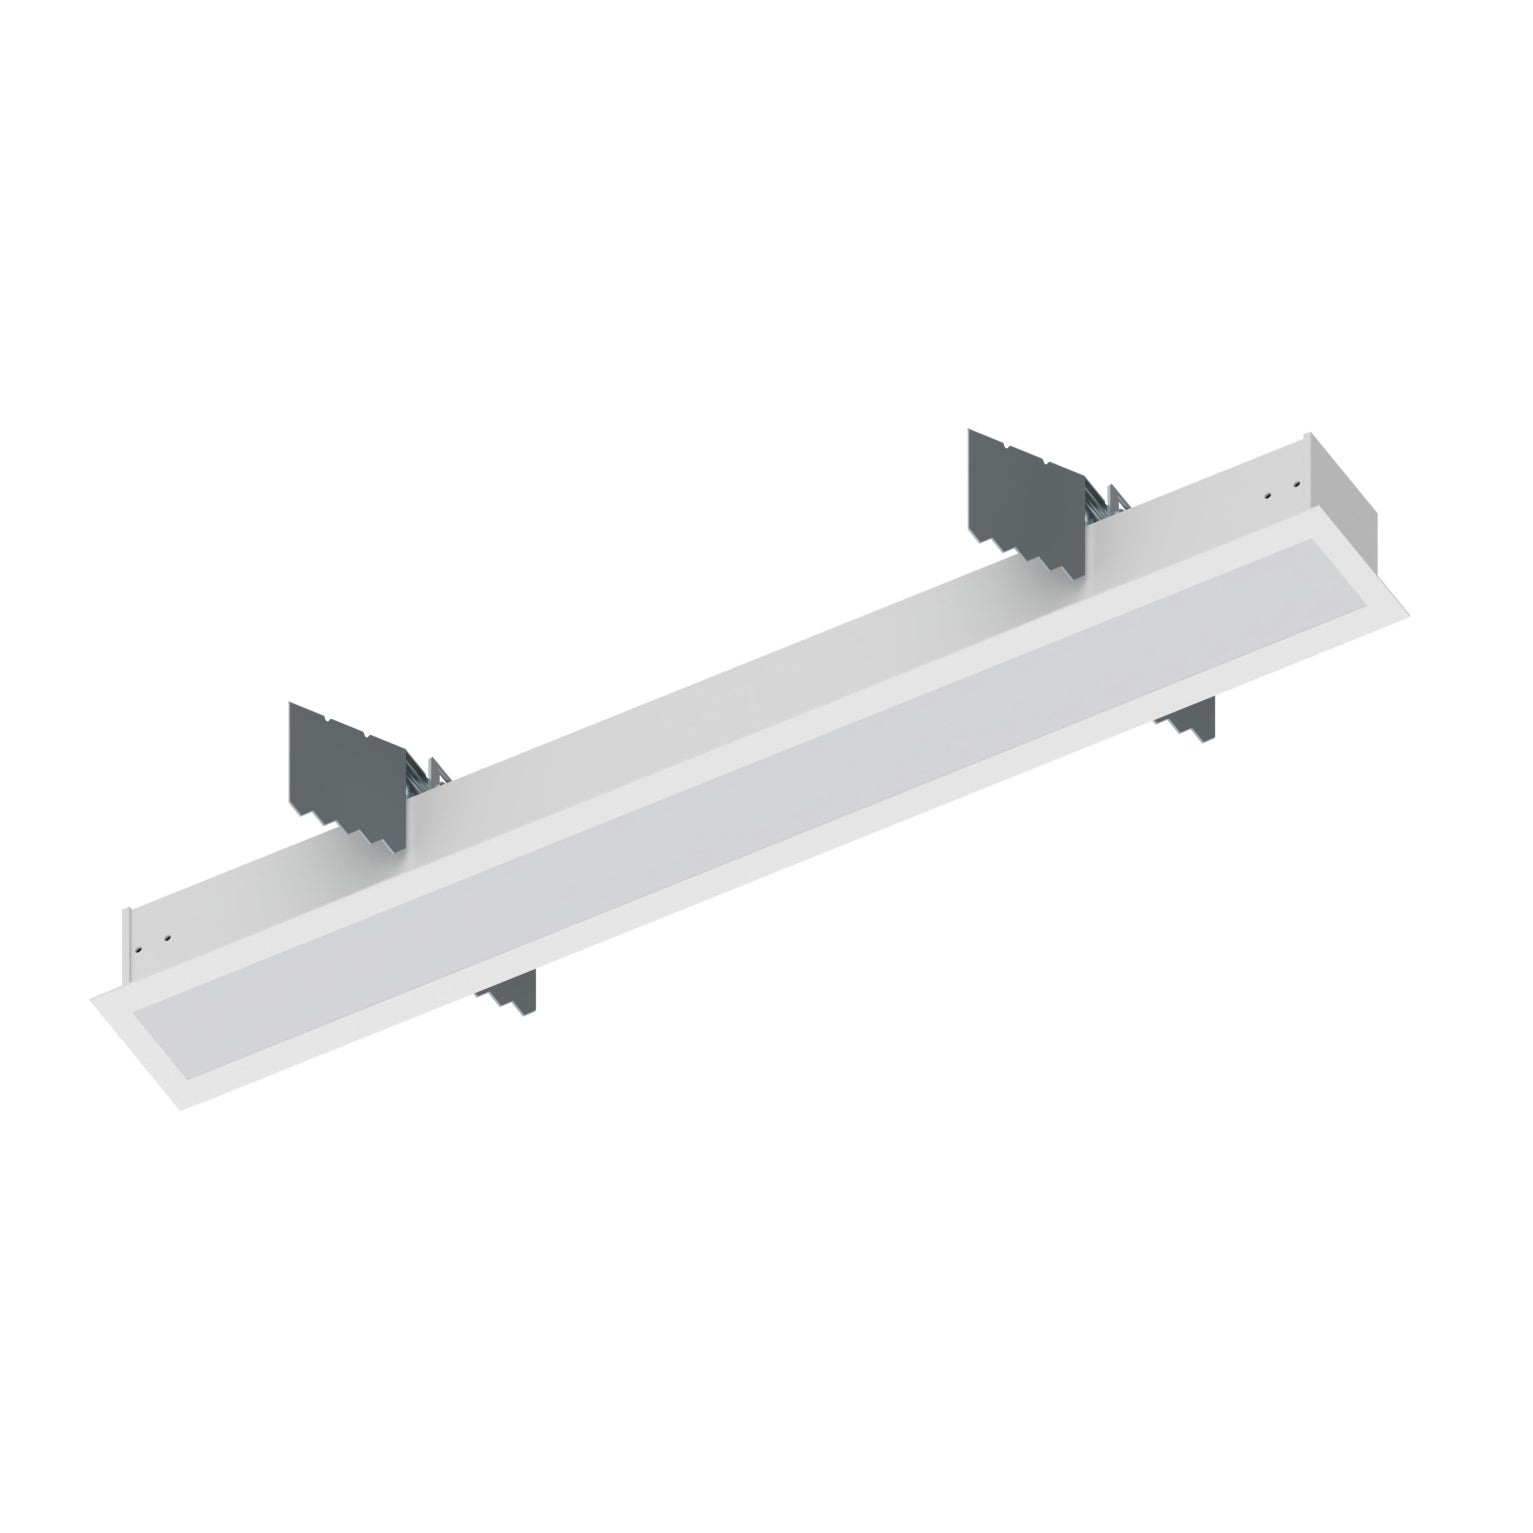 Nora Lighting NRLIN-21040W - Linear - 2' L-Line LED Recessed Linear, 2100lm / 4000K, White Finish